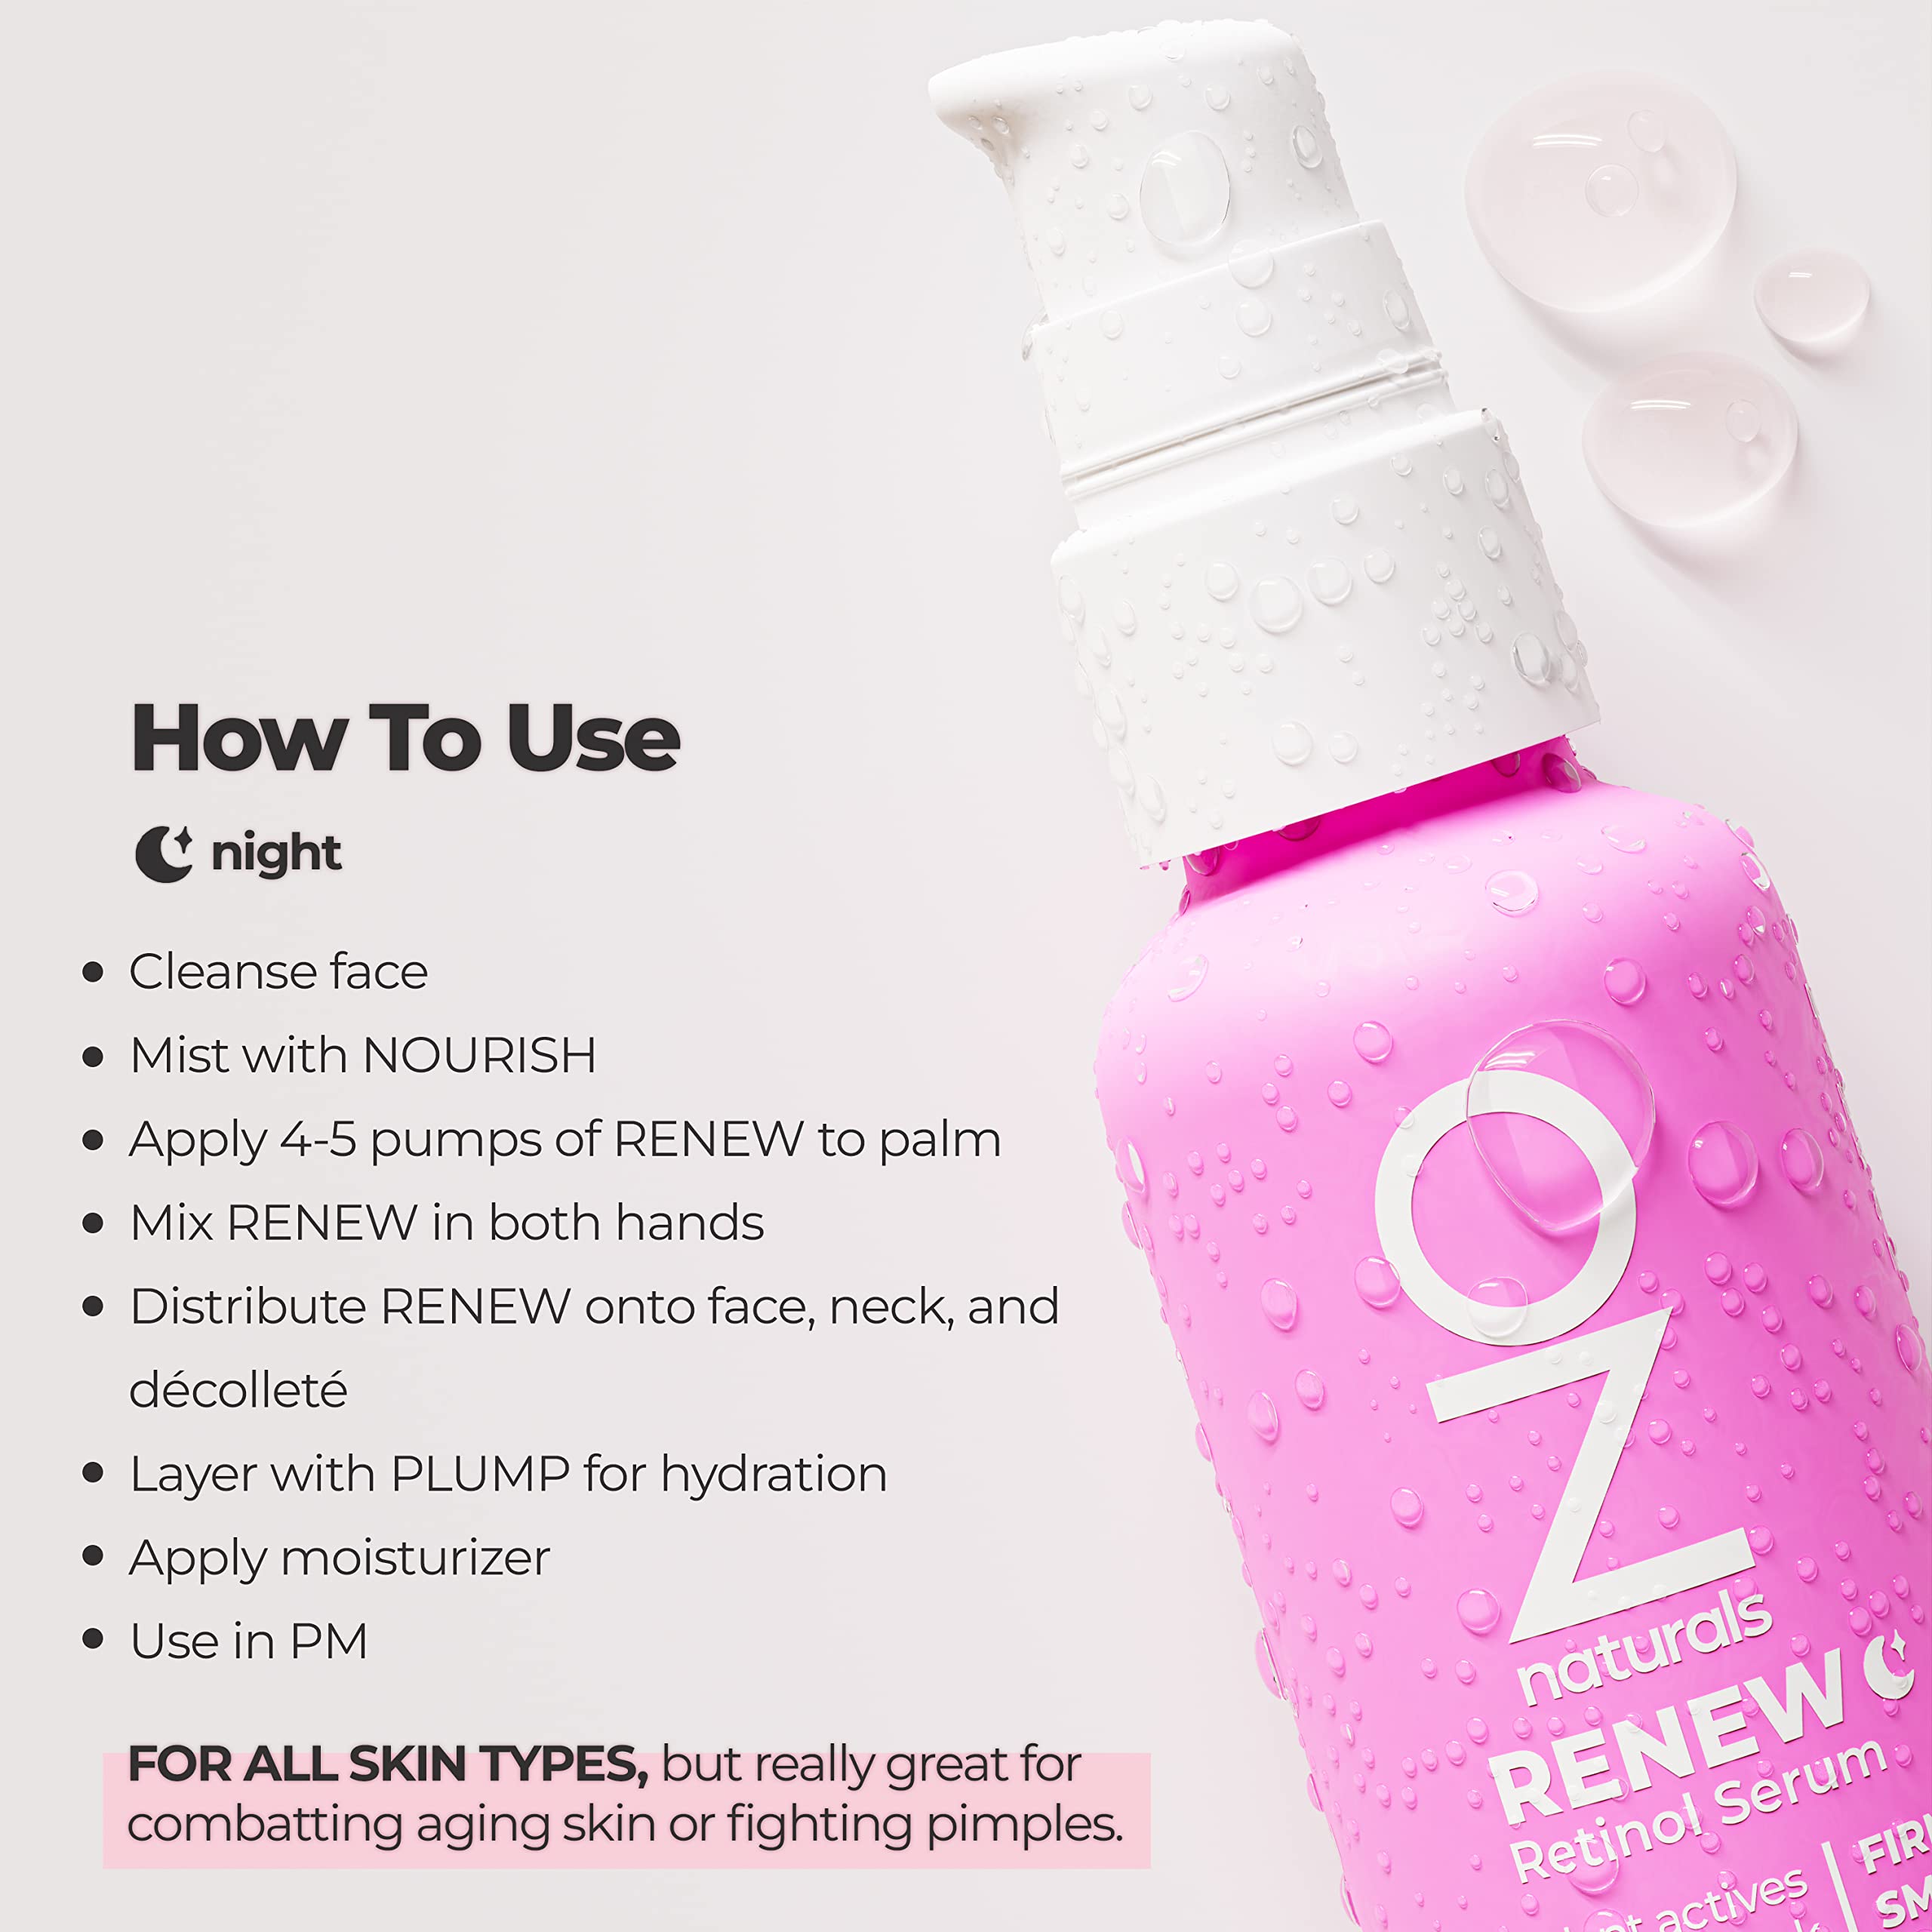 OZNATURALS RENEW: Retinol Serum/Increased Skin Renewal and Support - Improve Skin Tone, Reduce Age Spots, and Smooth Skin Texture - Nightly Skincare Routine | 1oz